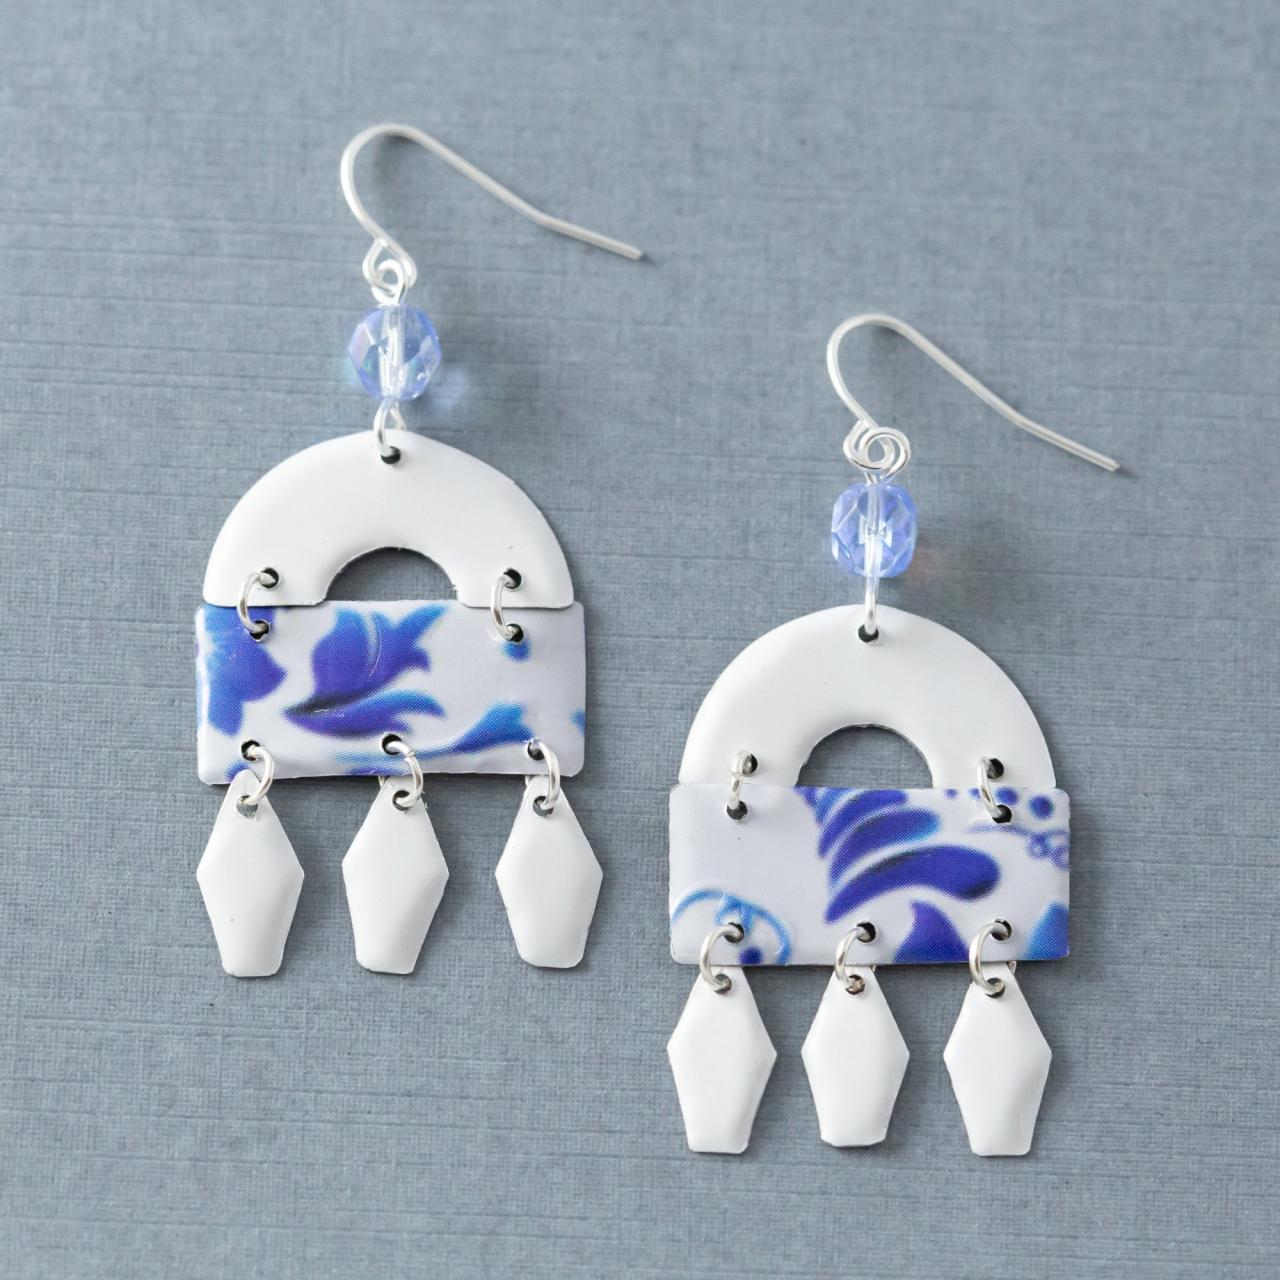 Blue And White Geometric Earrings, Arch Earrings, Tin Earrings, Modern Earrings, Geometric Jewelry, Boho Jewelry